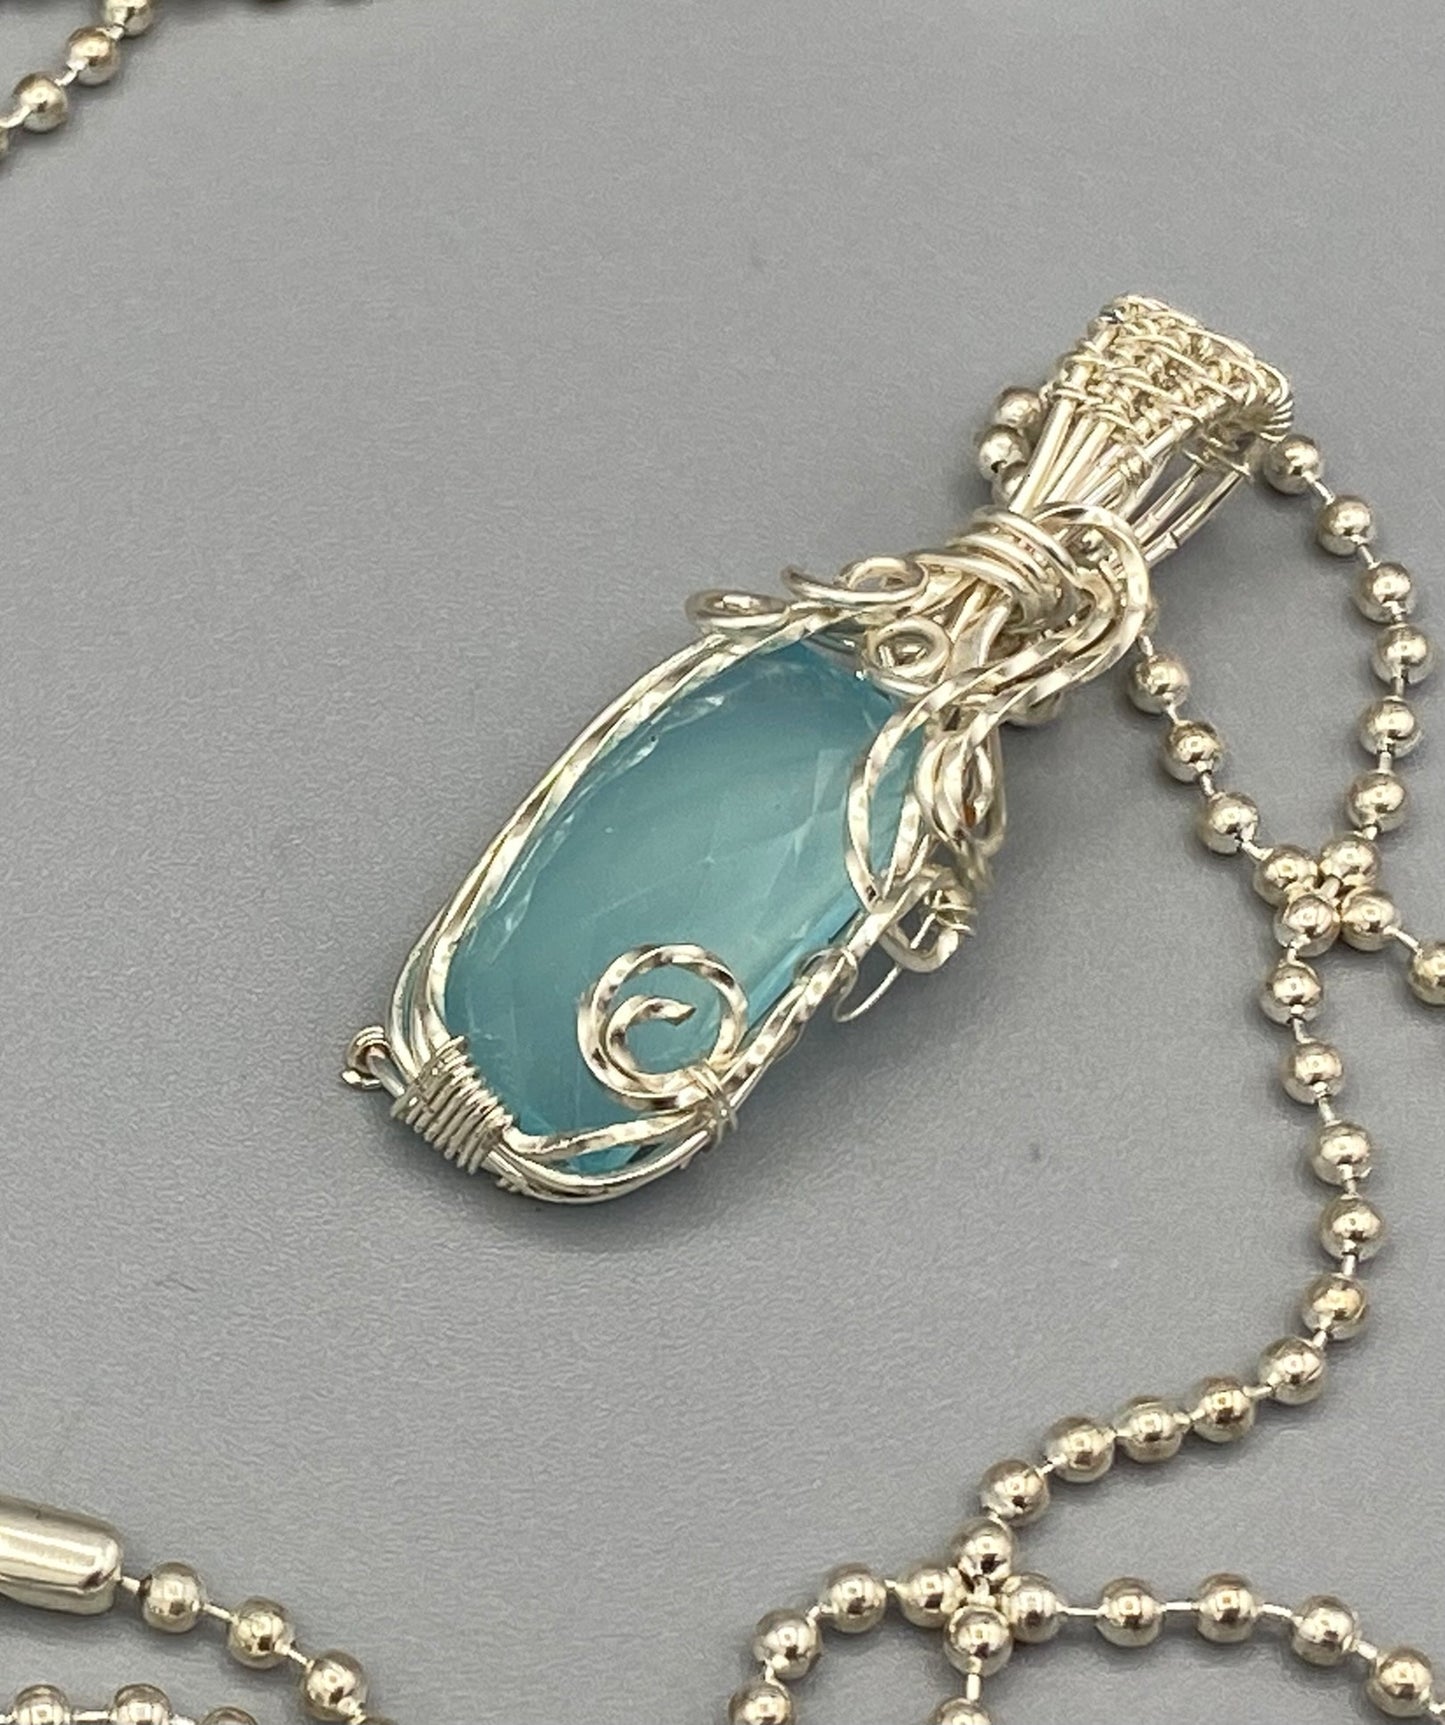 Faceted Rectangular Aqua Chalcedony Pendant | Wire Wrapped Necklace